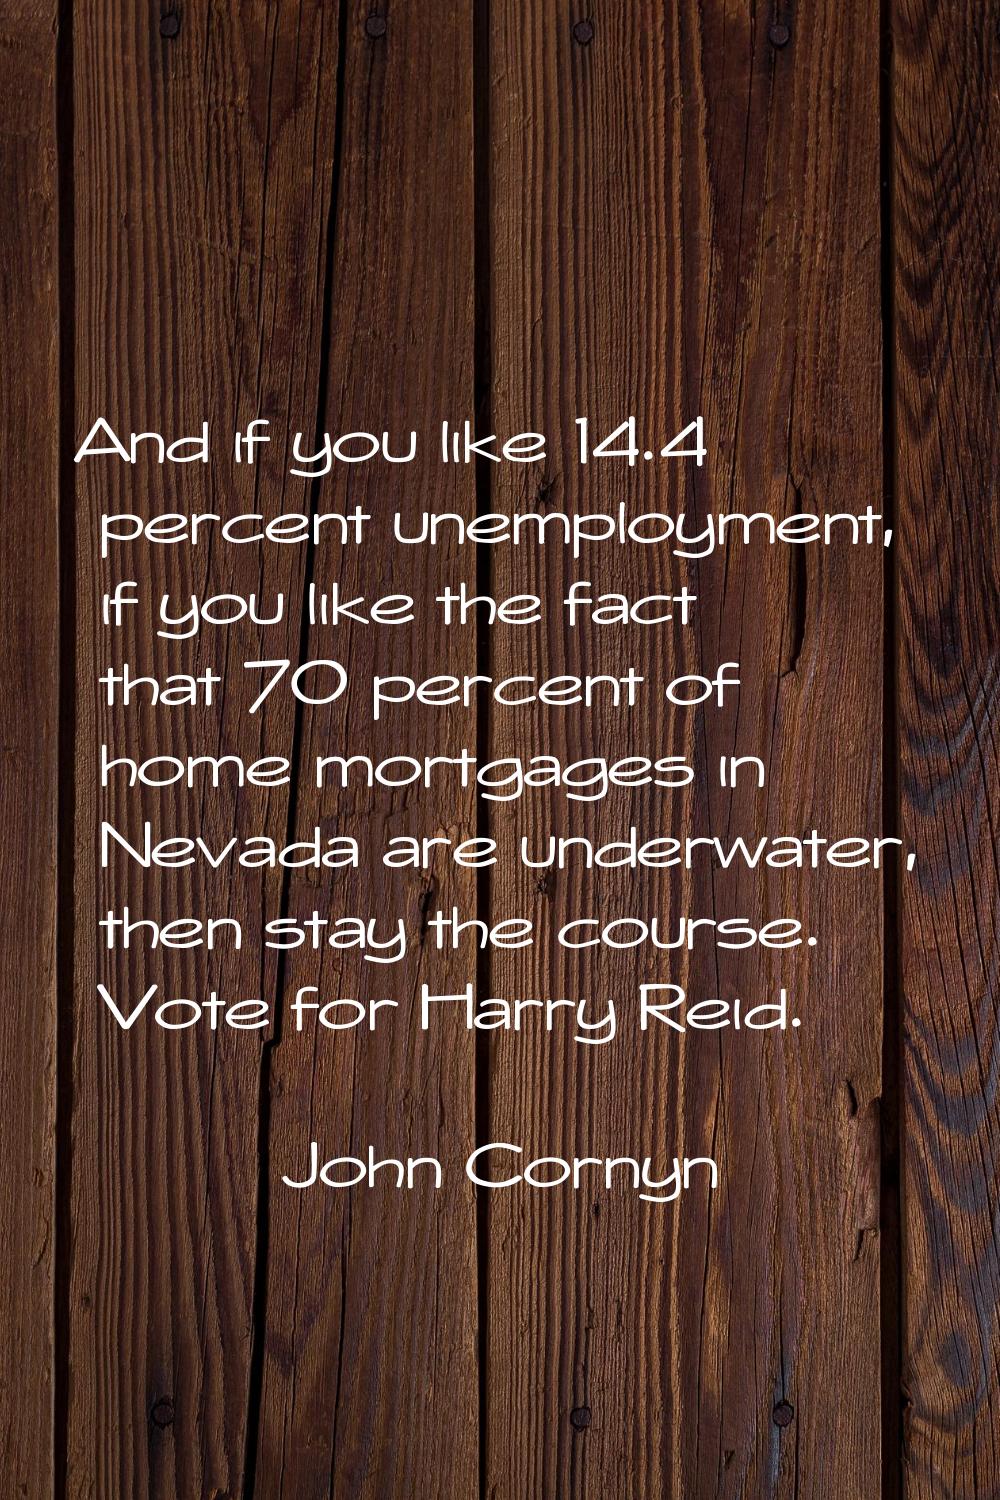 And if you like 14.4 percent unemployment, if you like the fact that 70 percent of home mortgages i